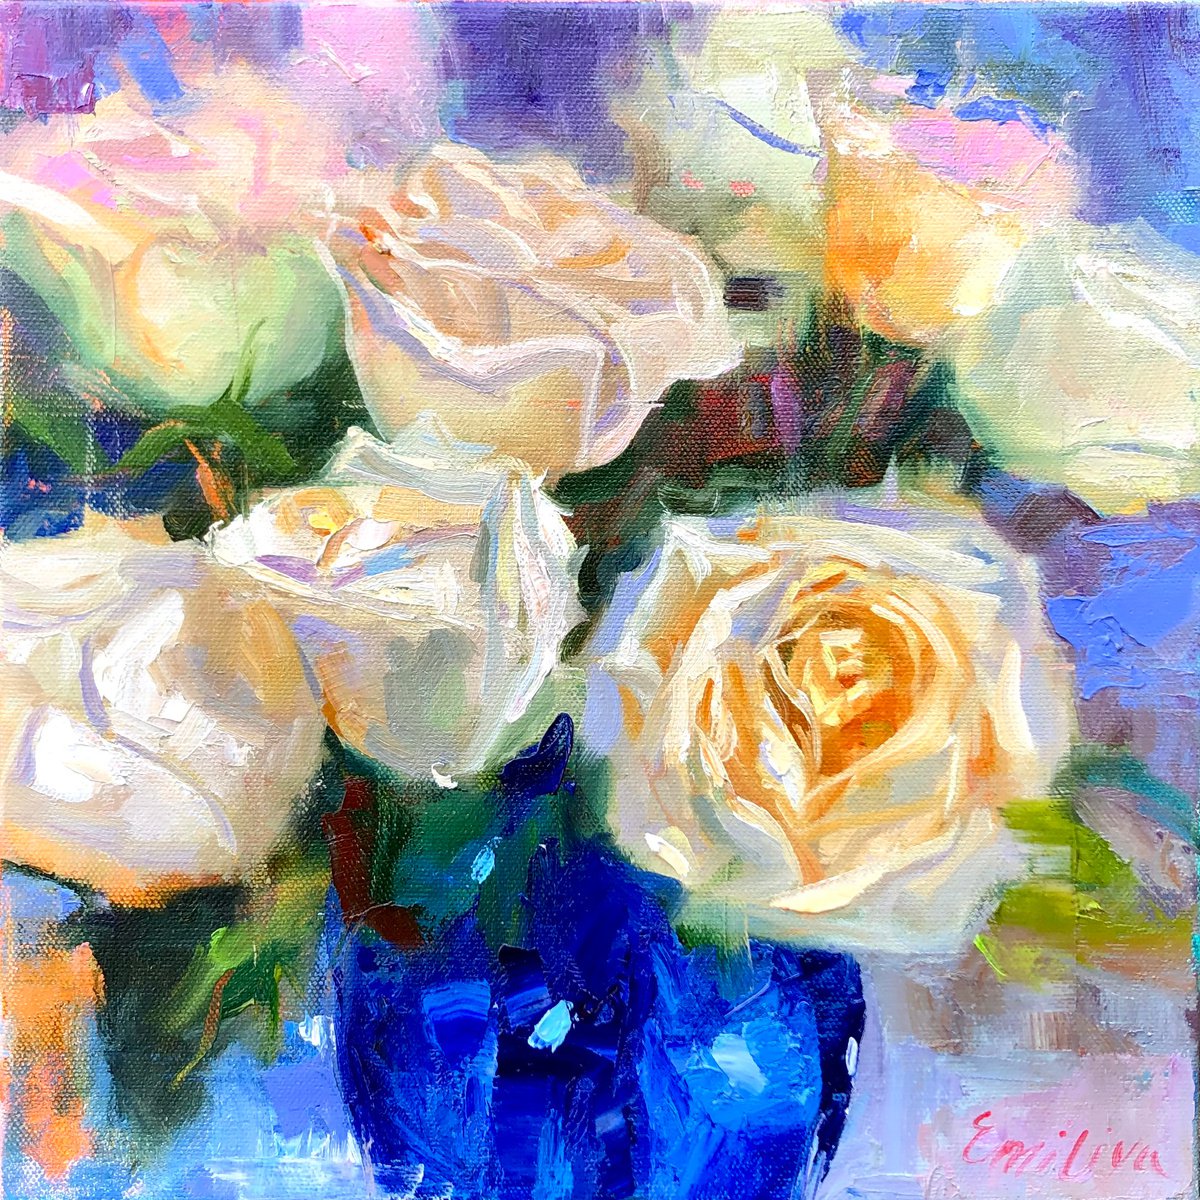 Blooming Rose Art White Roses Painting Original Oil On Canvas Impressionist Art Mothers Da... by Emiliya Lane